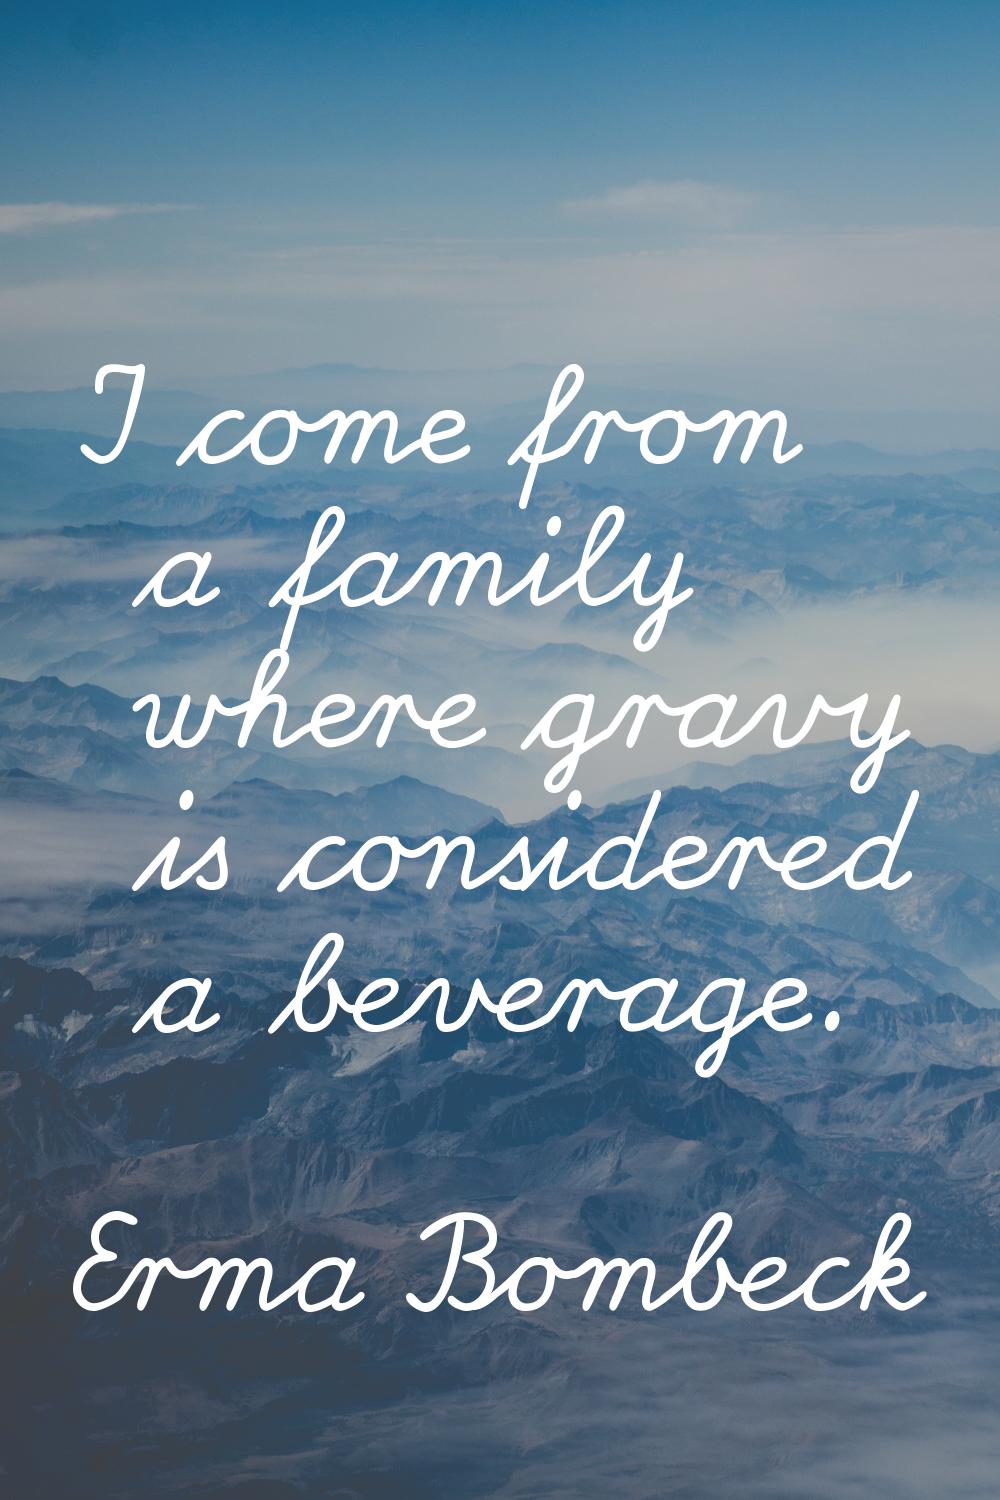 I come from a family where gravy is considered a beverage.